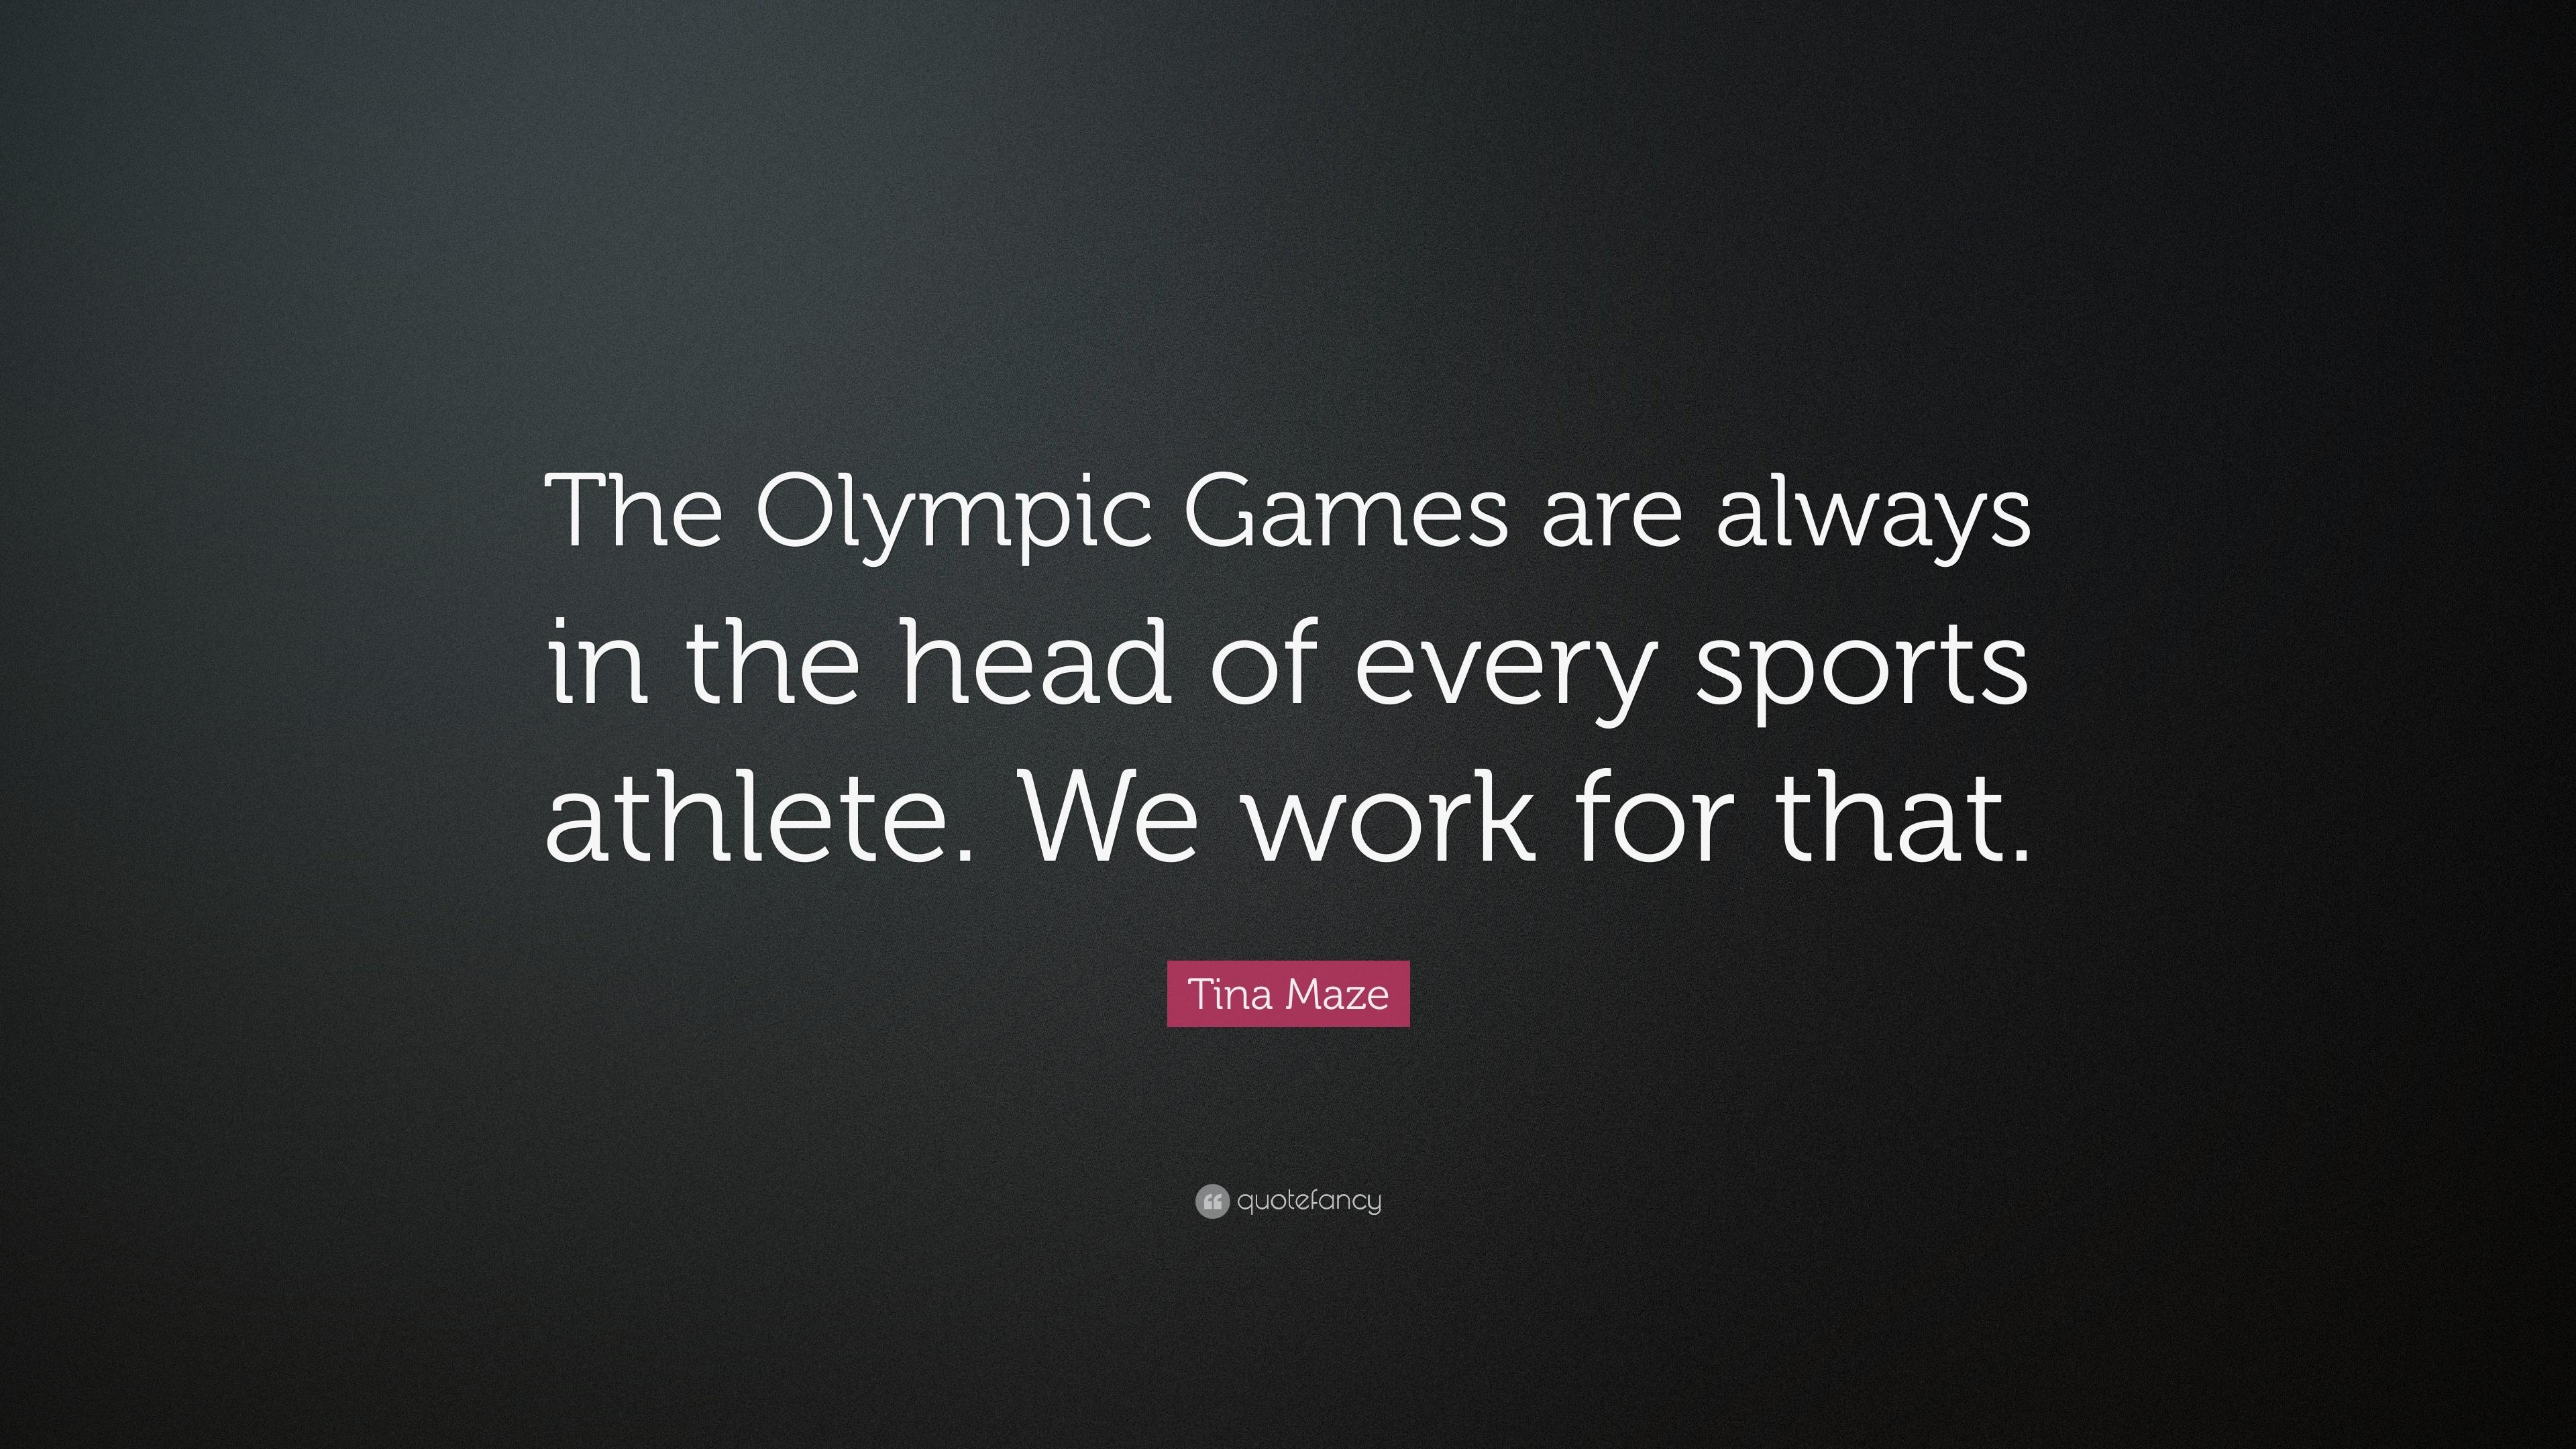 Tina Maze Quote: “The Olympic Games are always in the head of every